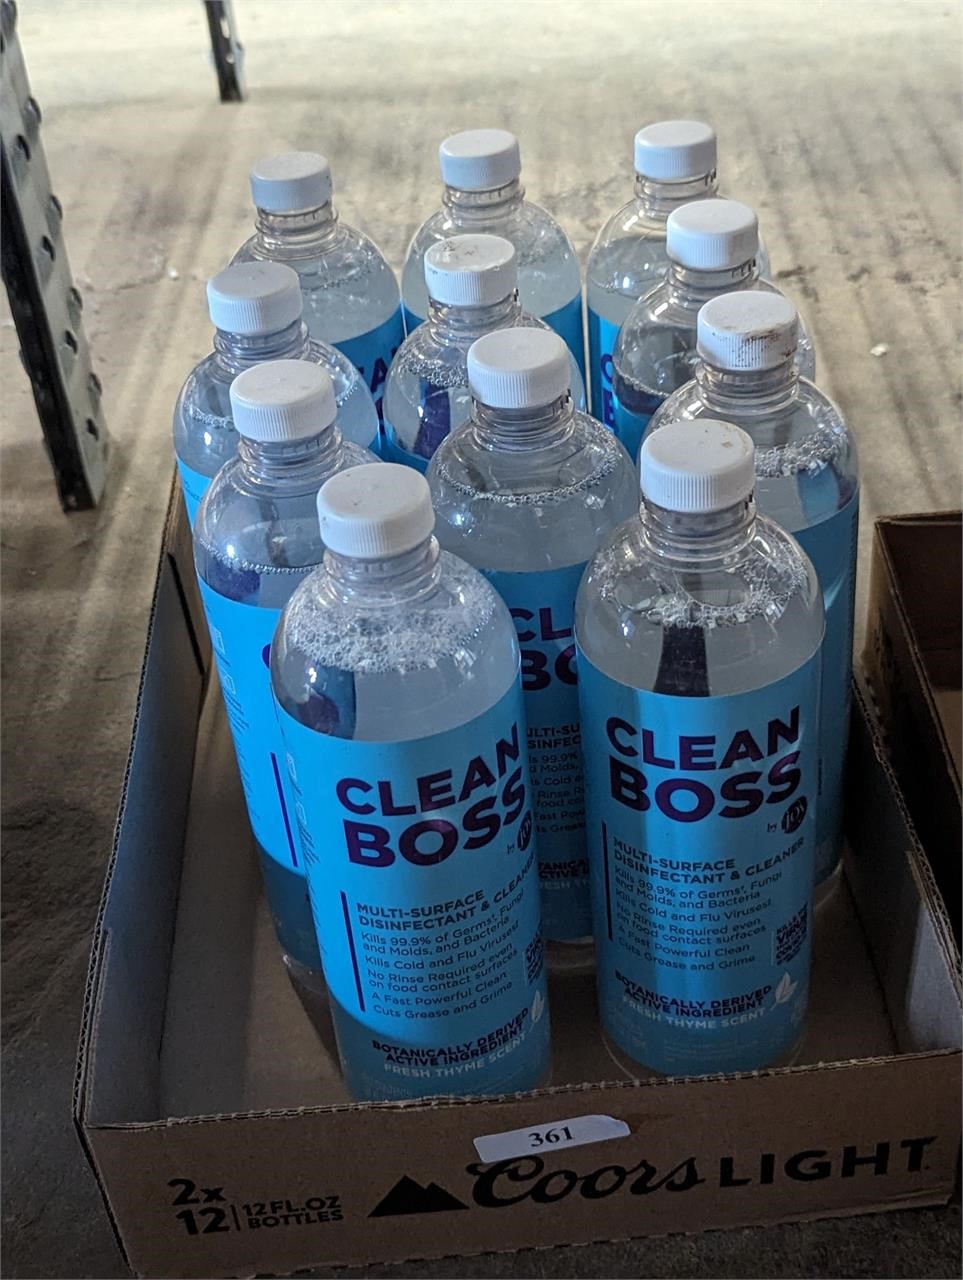 Clean boss lot cleaning supplies